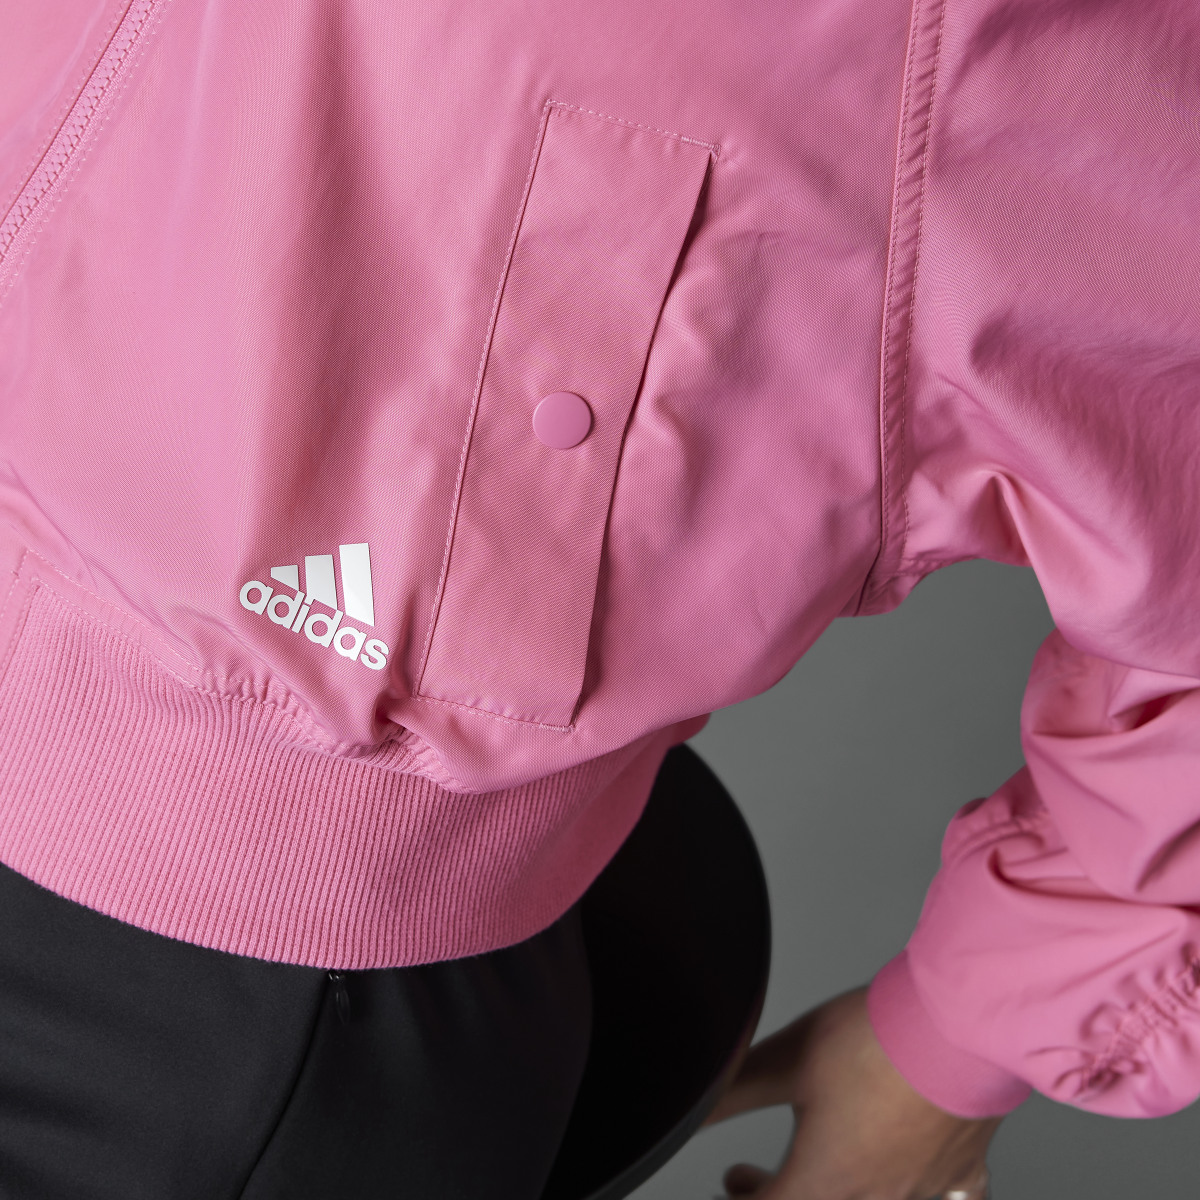 Adidas Collective Power Bomber Jacket. 9